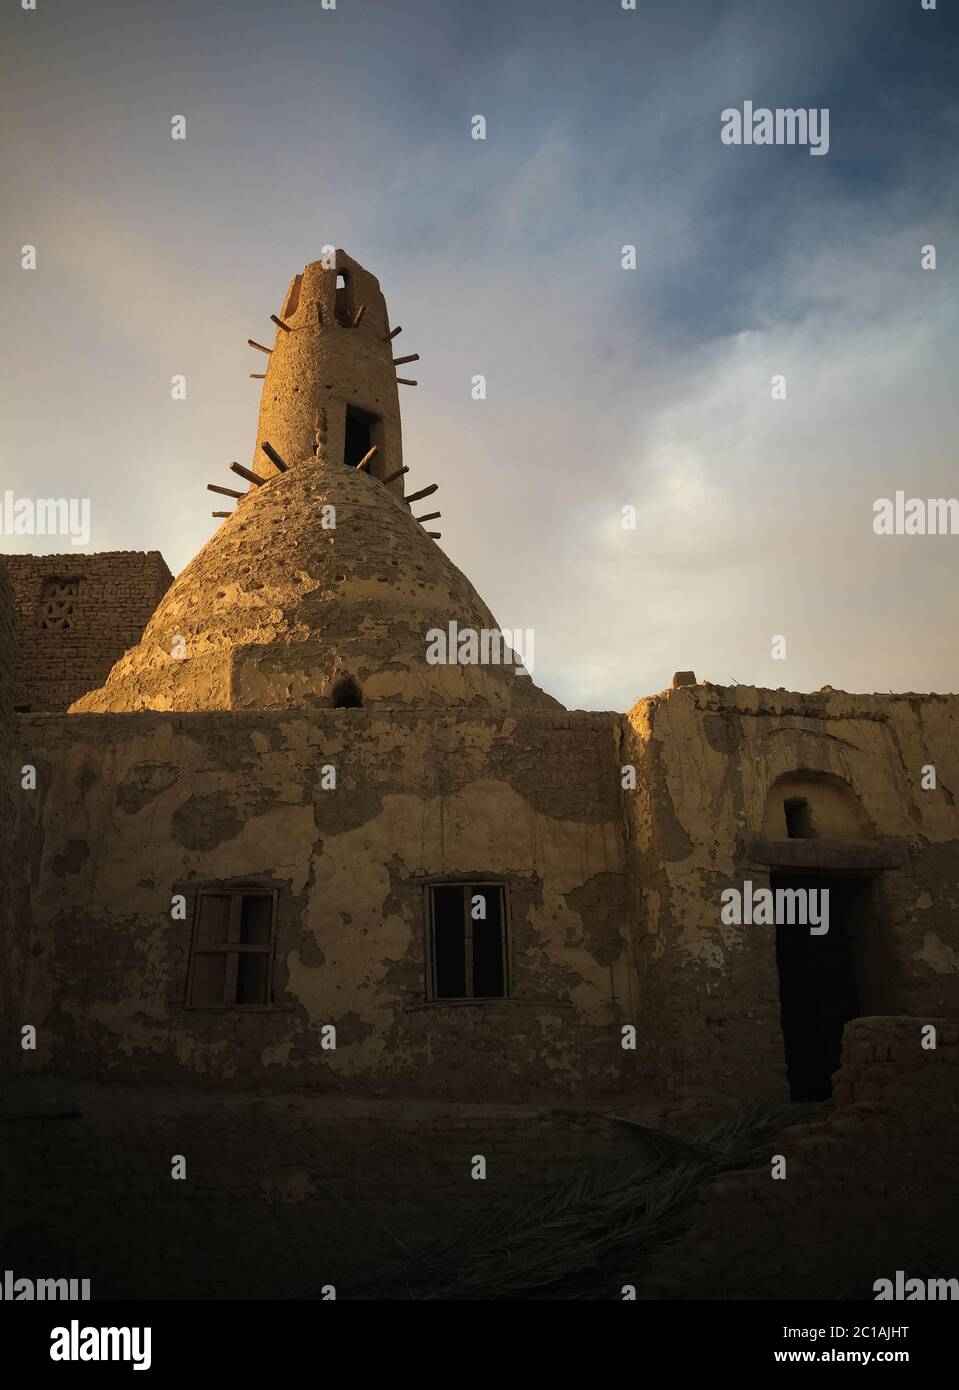 Exterior view to Al-Qasr old town and mosque, Dakhla oasis, Egypt Stock Photo